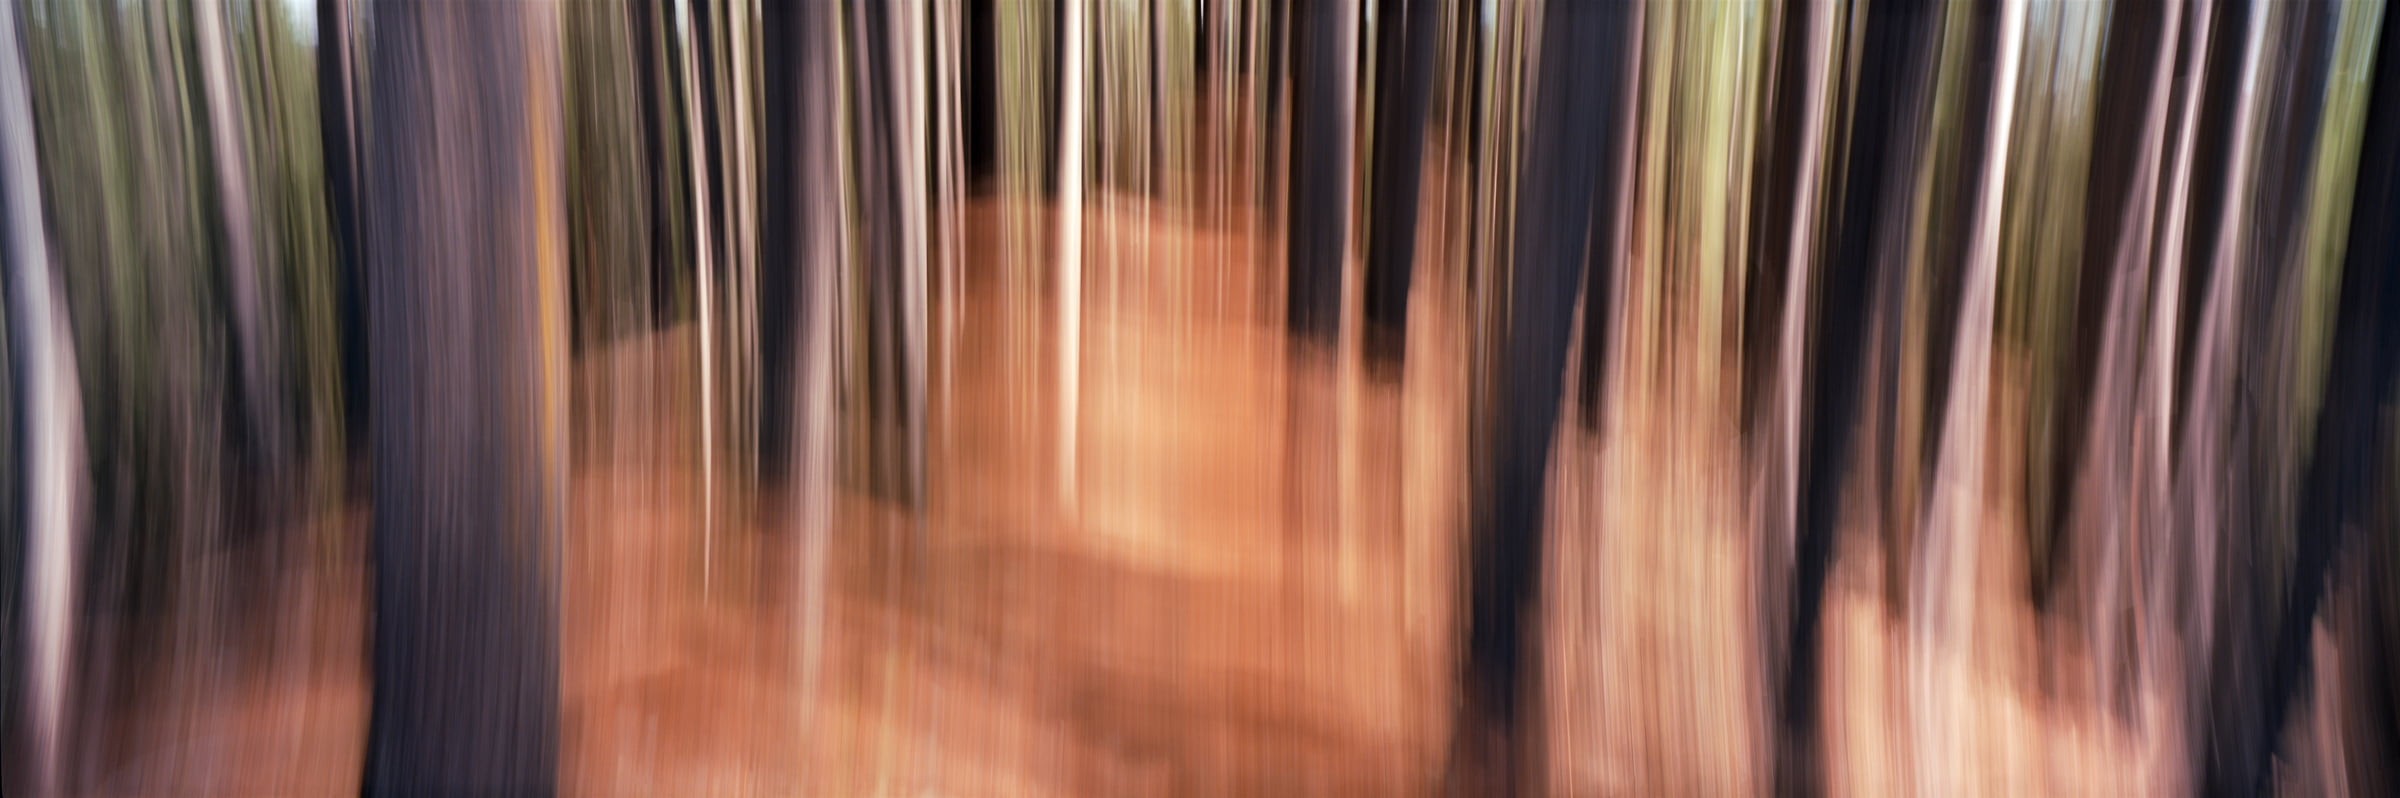 334 megapixels! A very high resolution, large-format VAST photo print of an abstract nature scene in a forest; fine art photograph created by Scott Dimond in Kimberley, British Columbia, Canada.